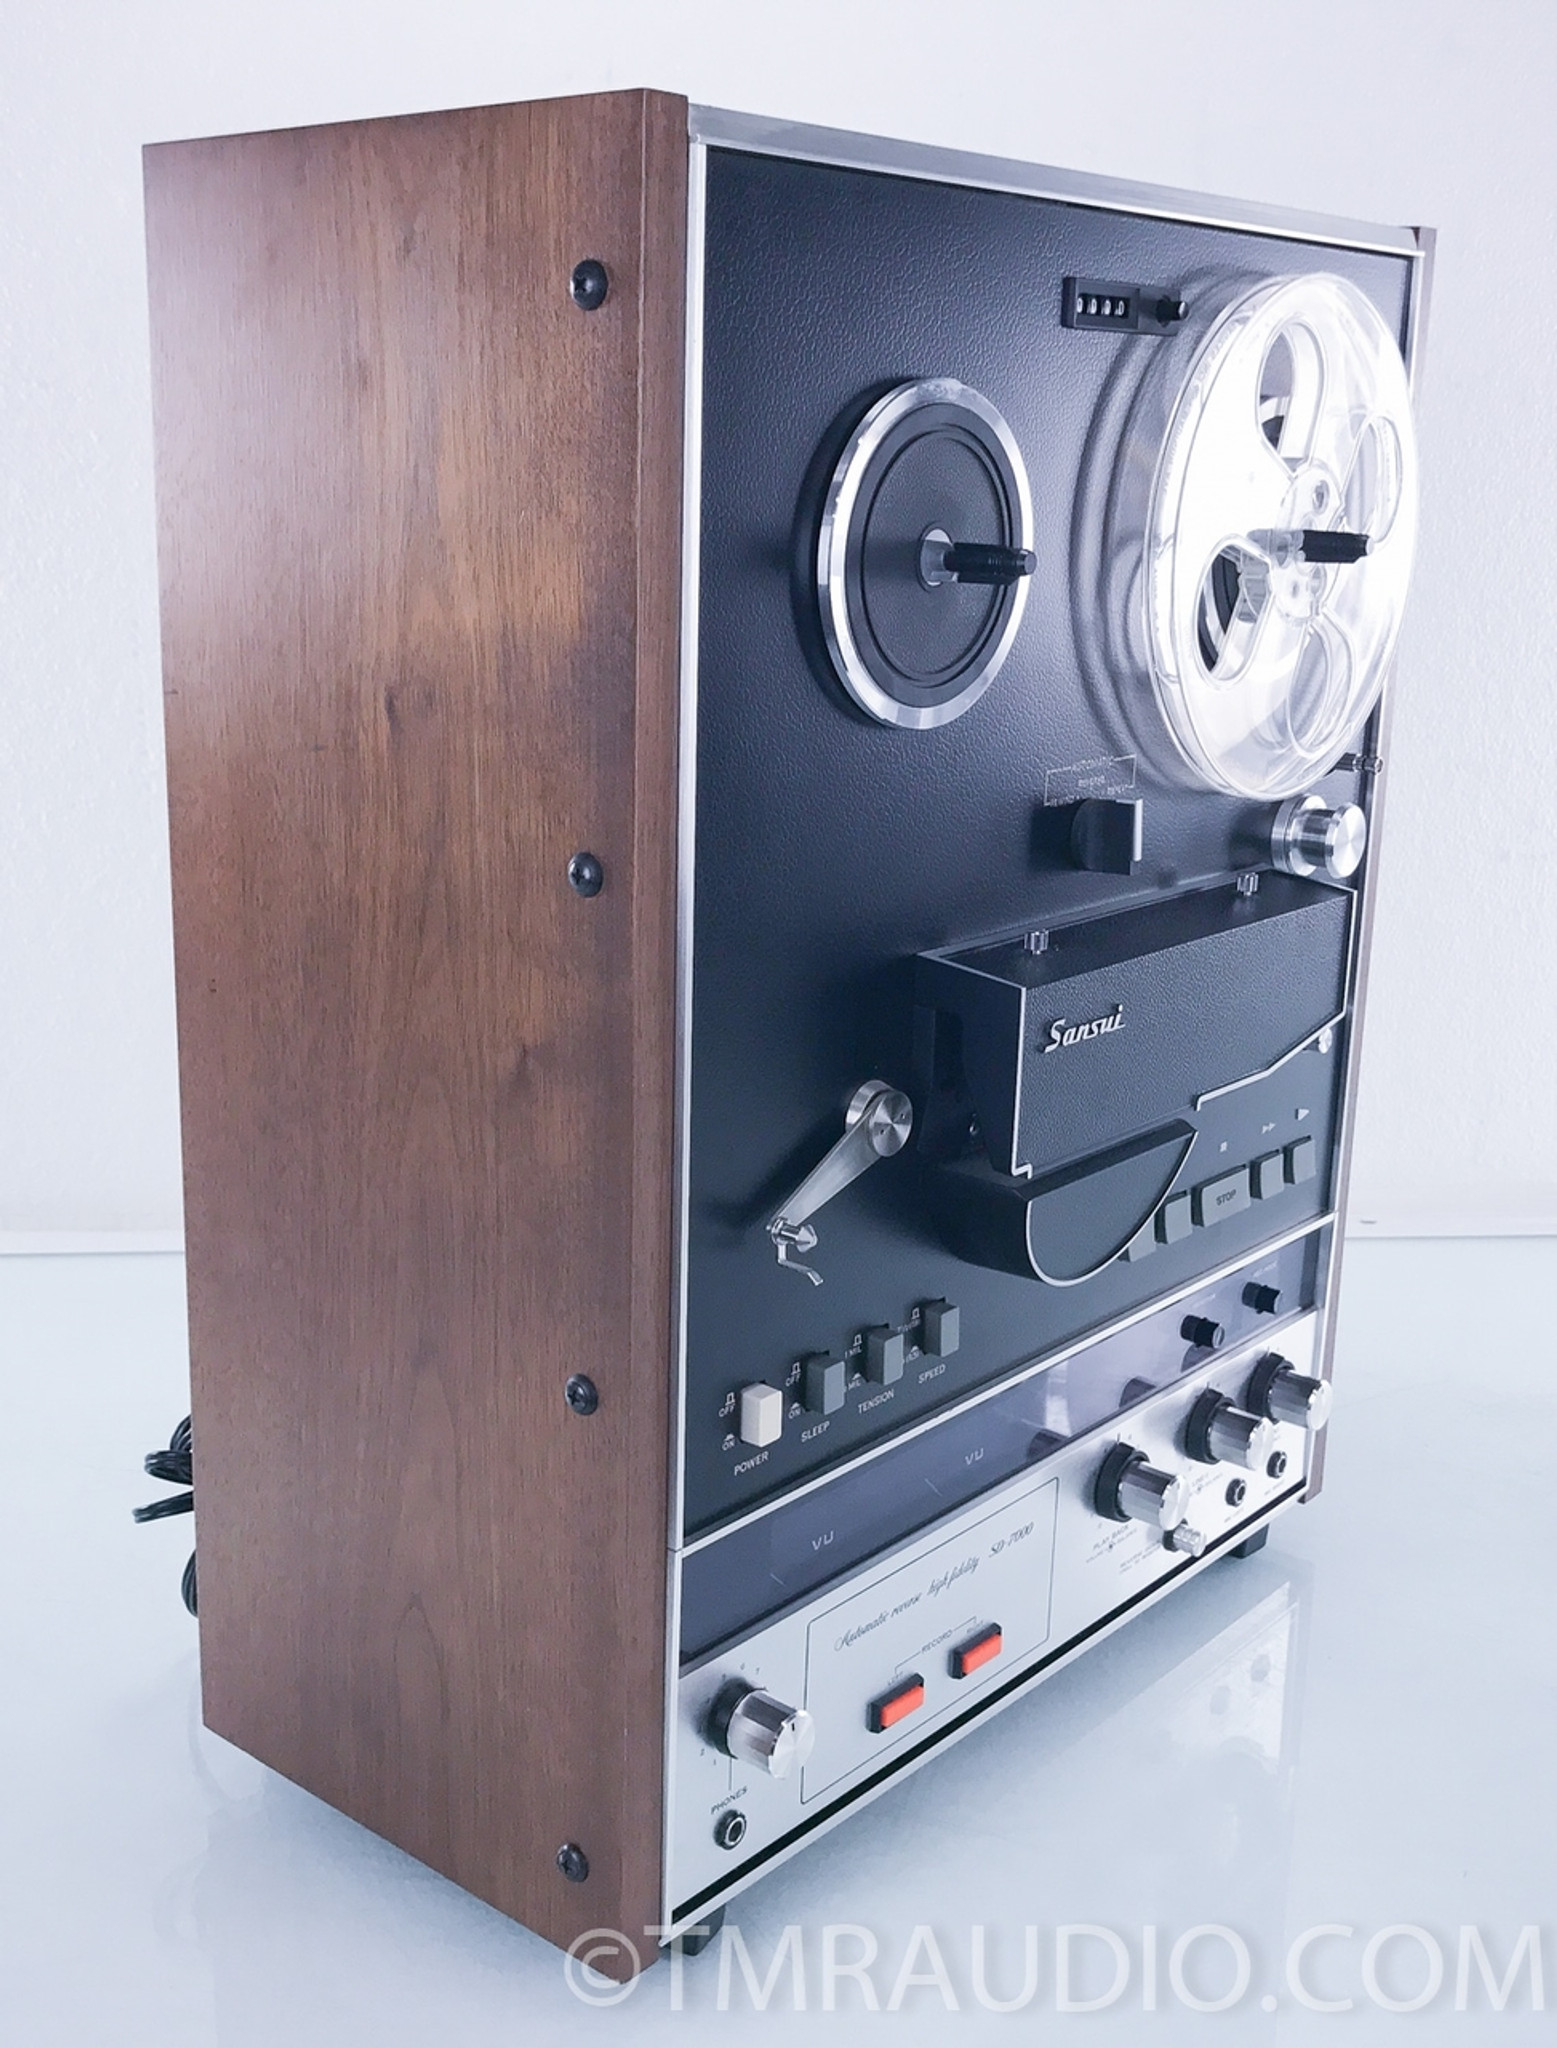 Sansui SD-7000 Vintage Reel to Reel Tape Recorder / Player - The Music Room